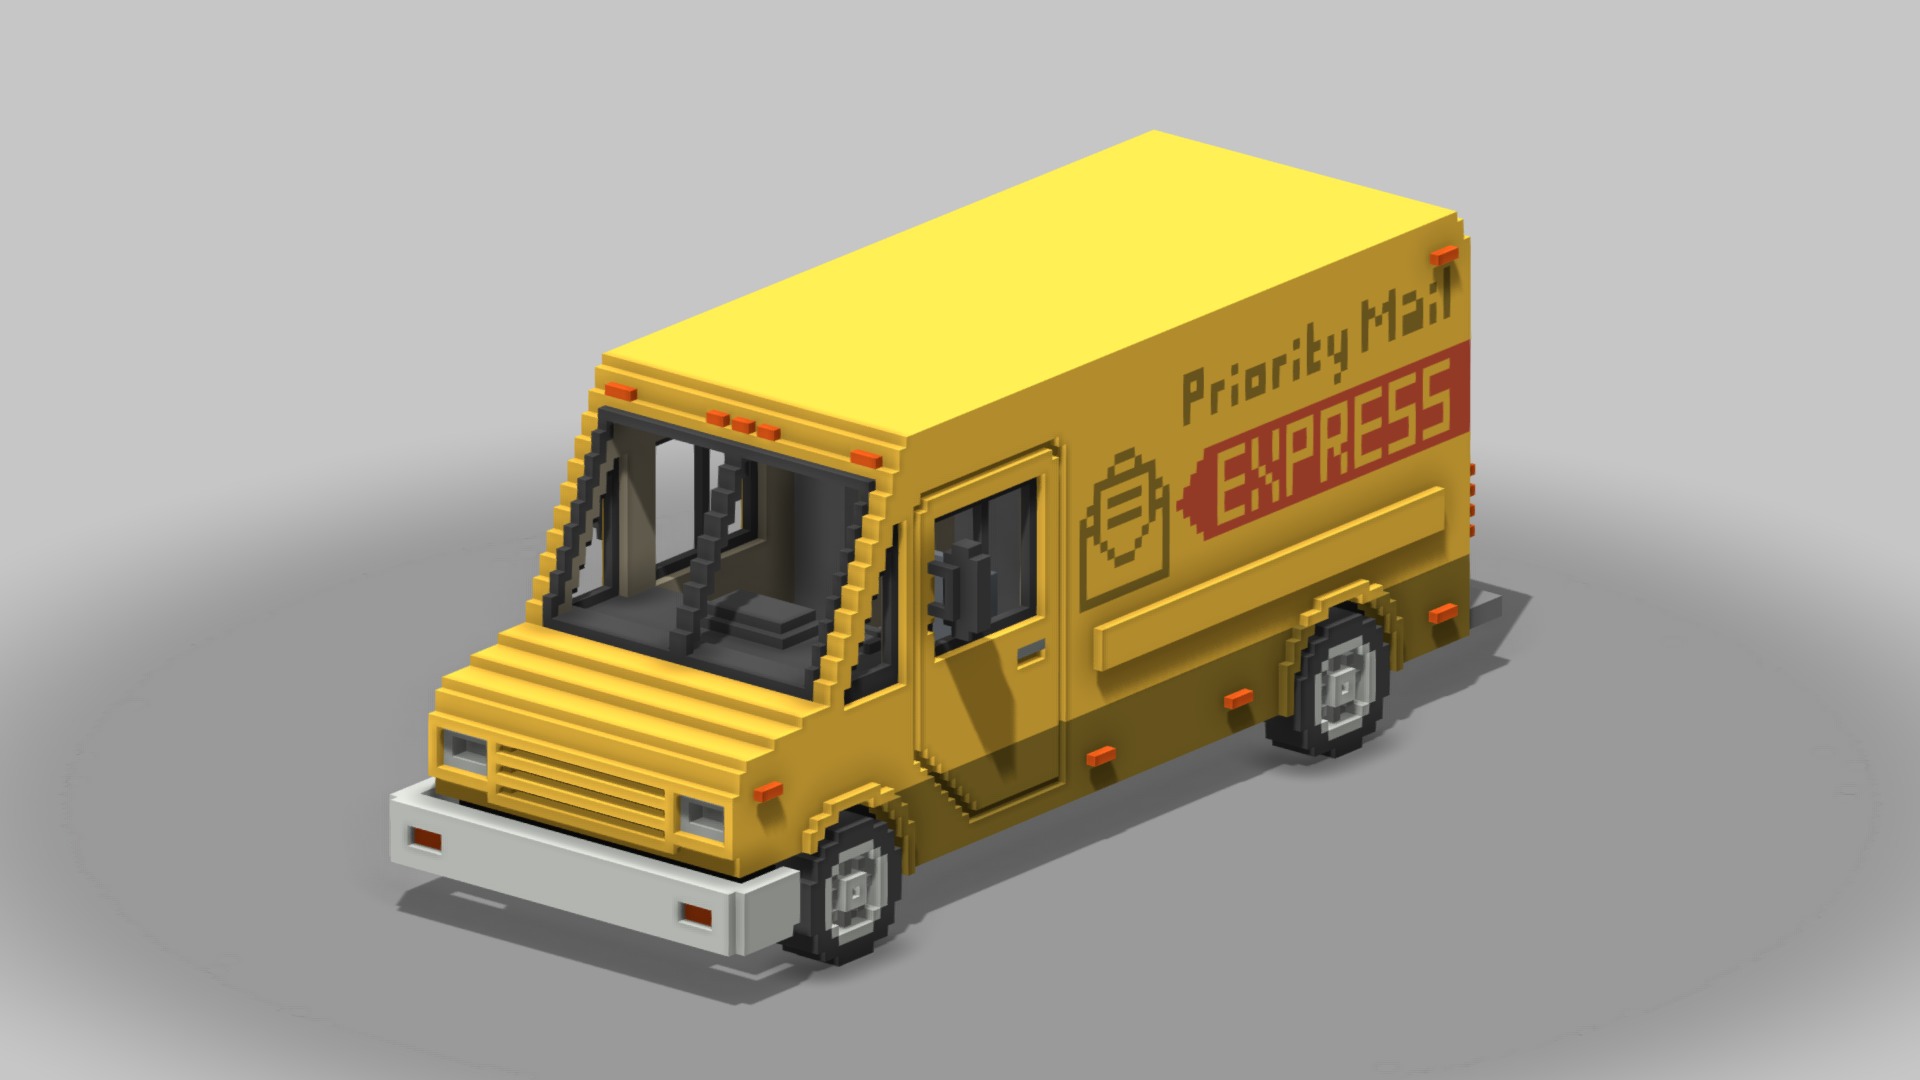 3D model Voxel Mail Van - This is a 3D model of the Voxel Mail Van. The 3D model is about a yellow truck on a white background.